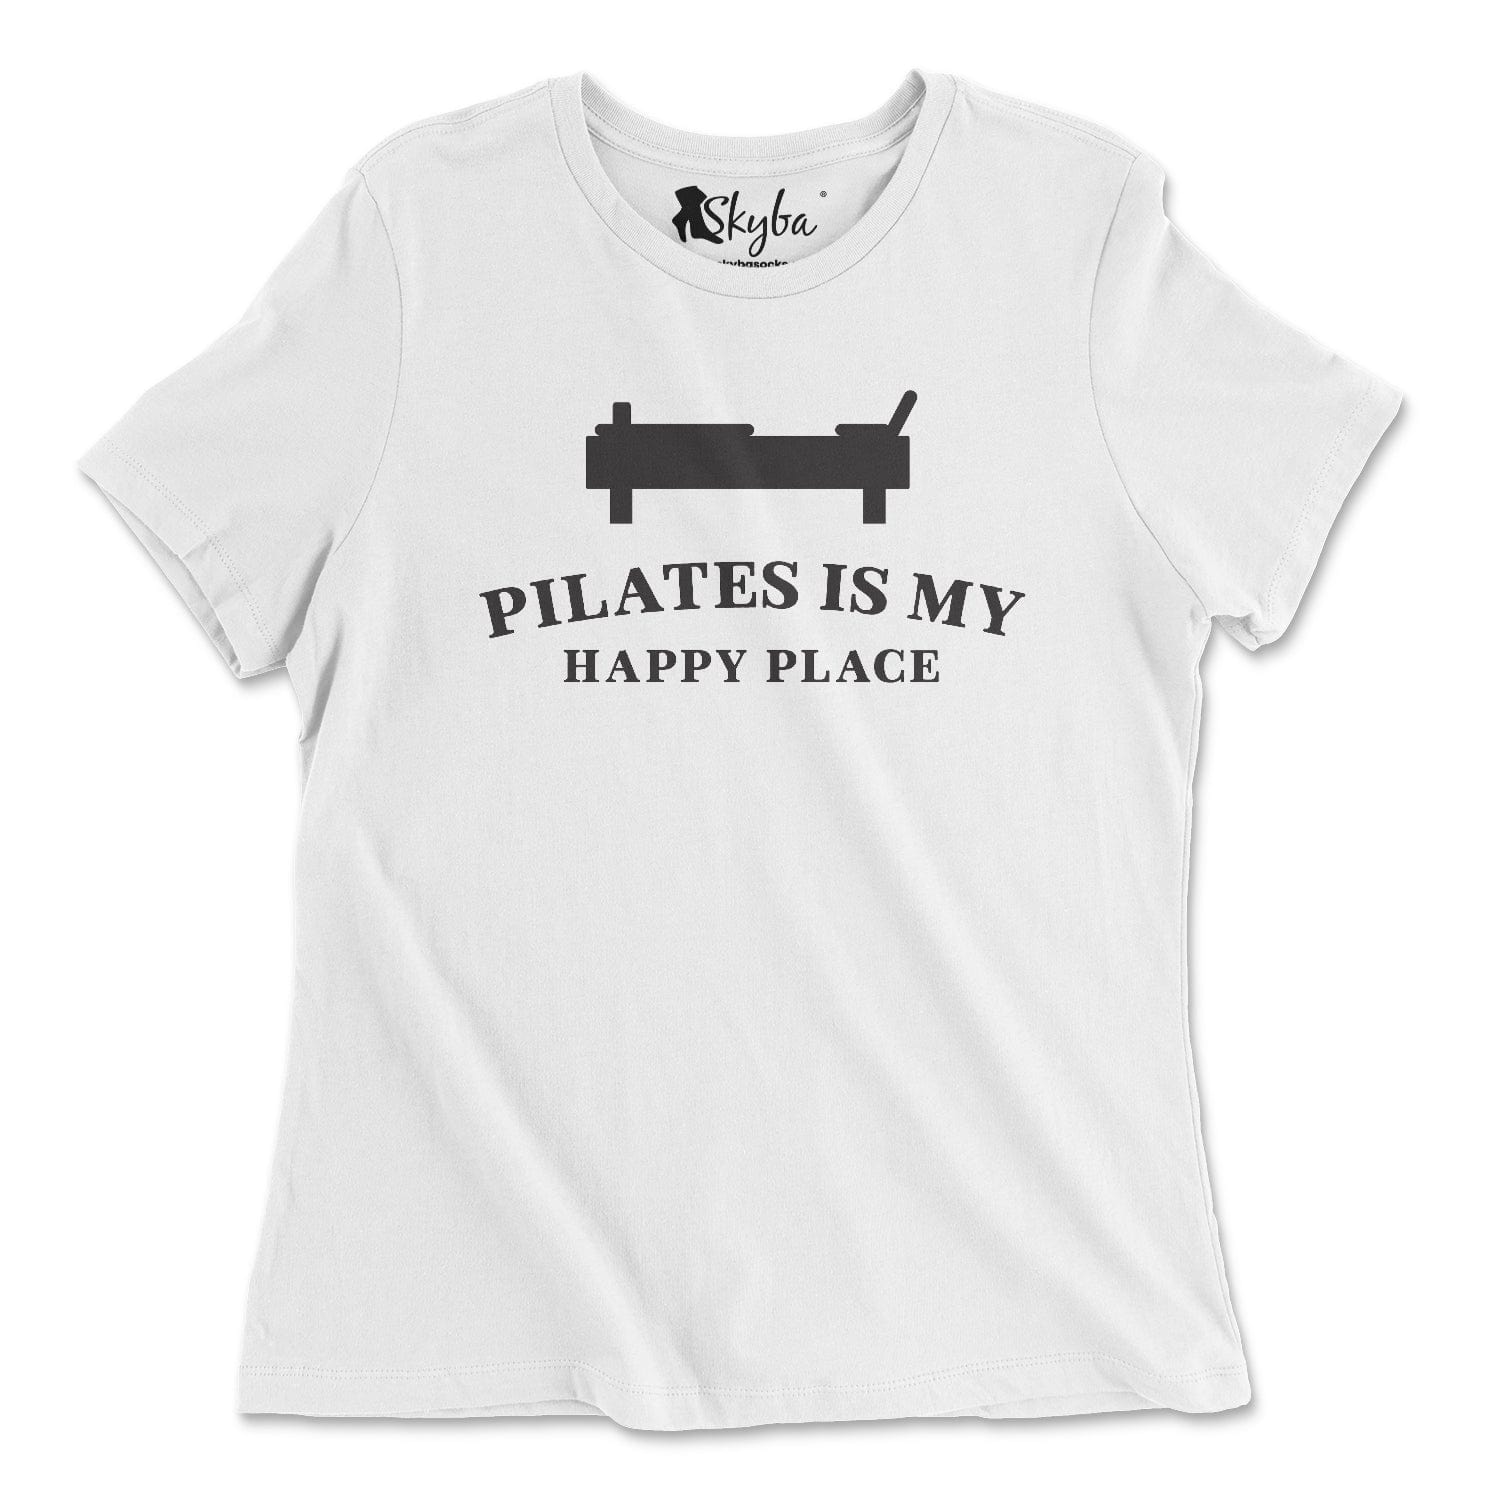 Pilates is My Happy Place - Classic Tee Skyba T-Shirt